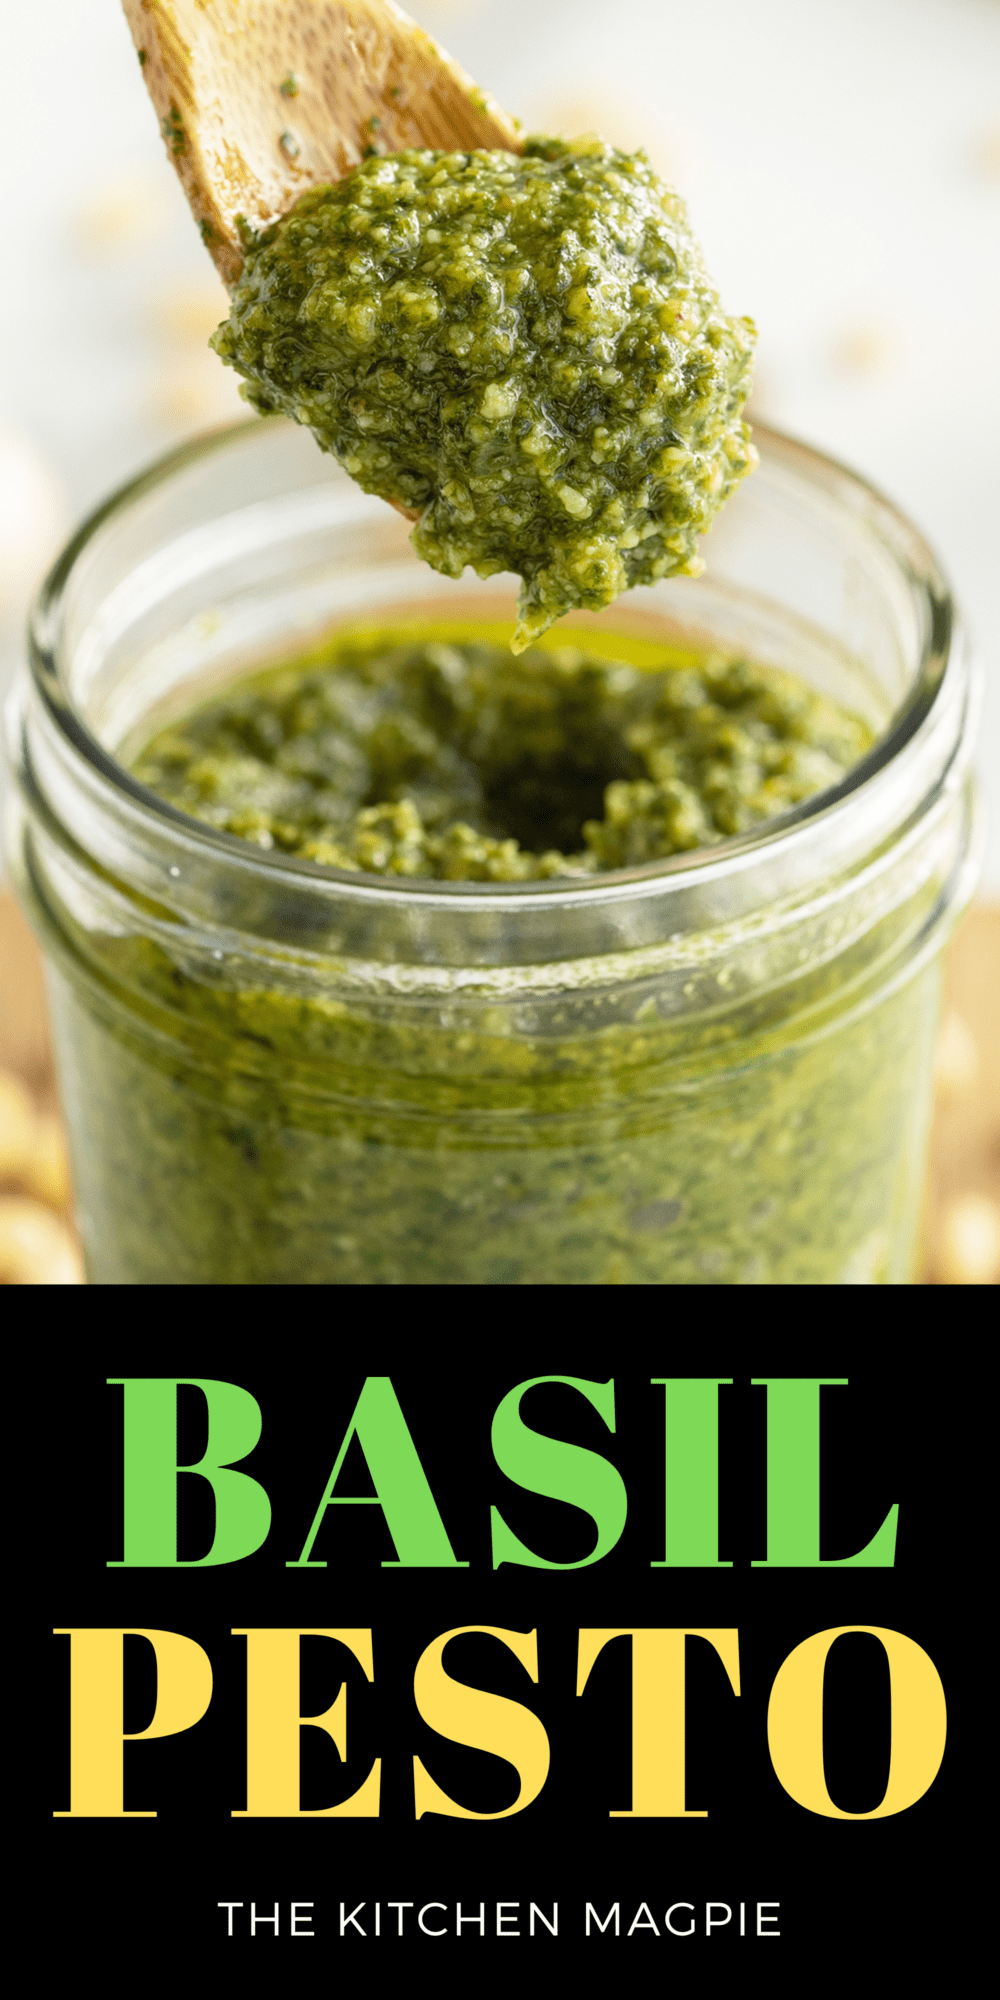 Some fresh, homemade basil pesto is one of those things that is easy to make by throwing all ingredients in a food processor.